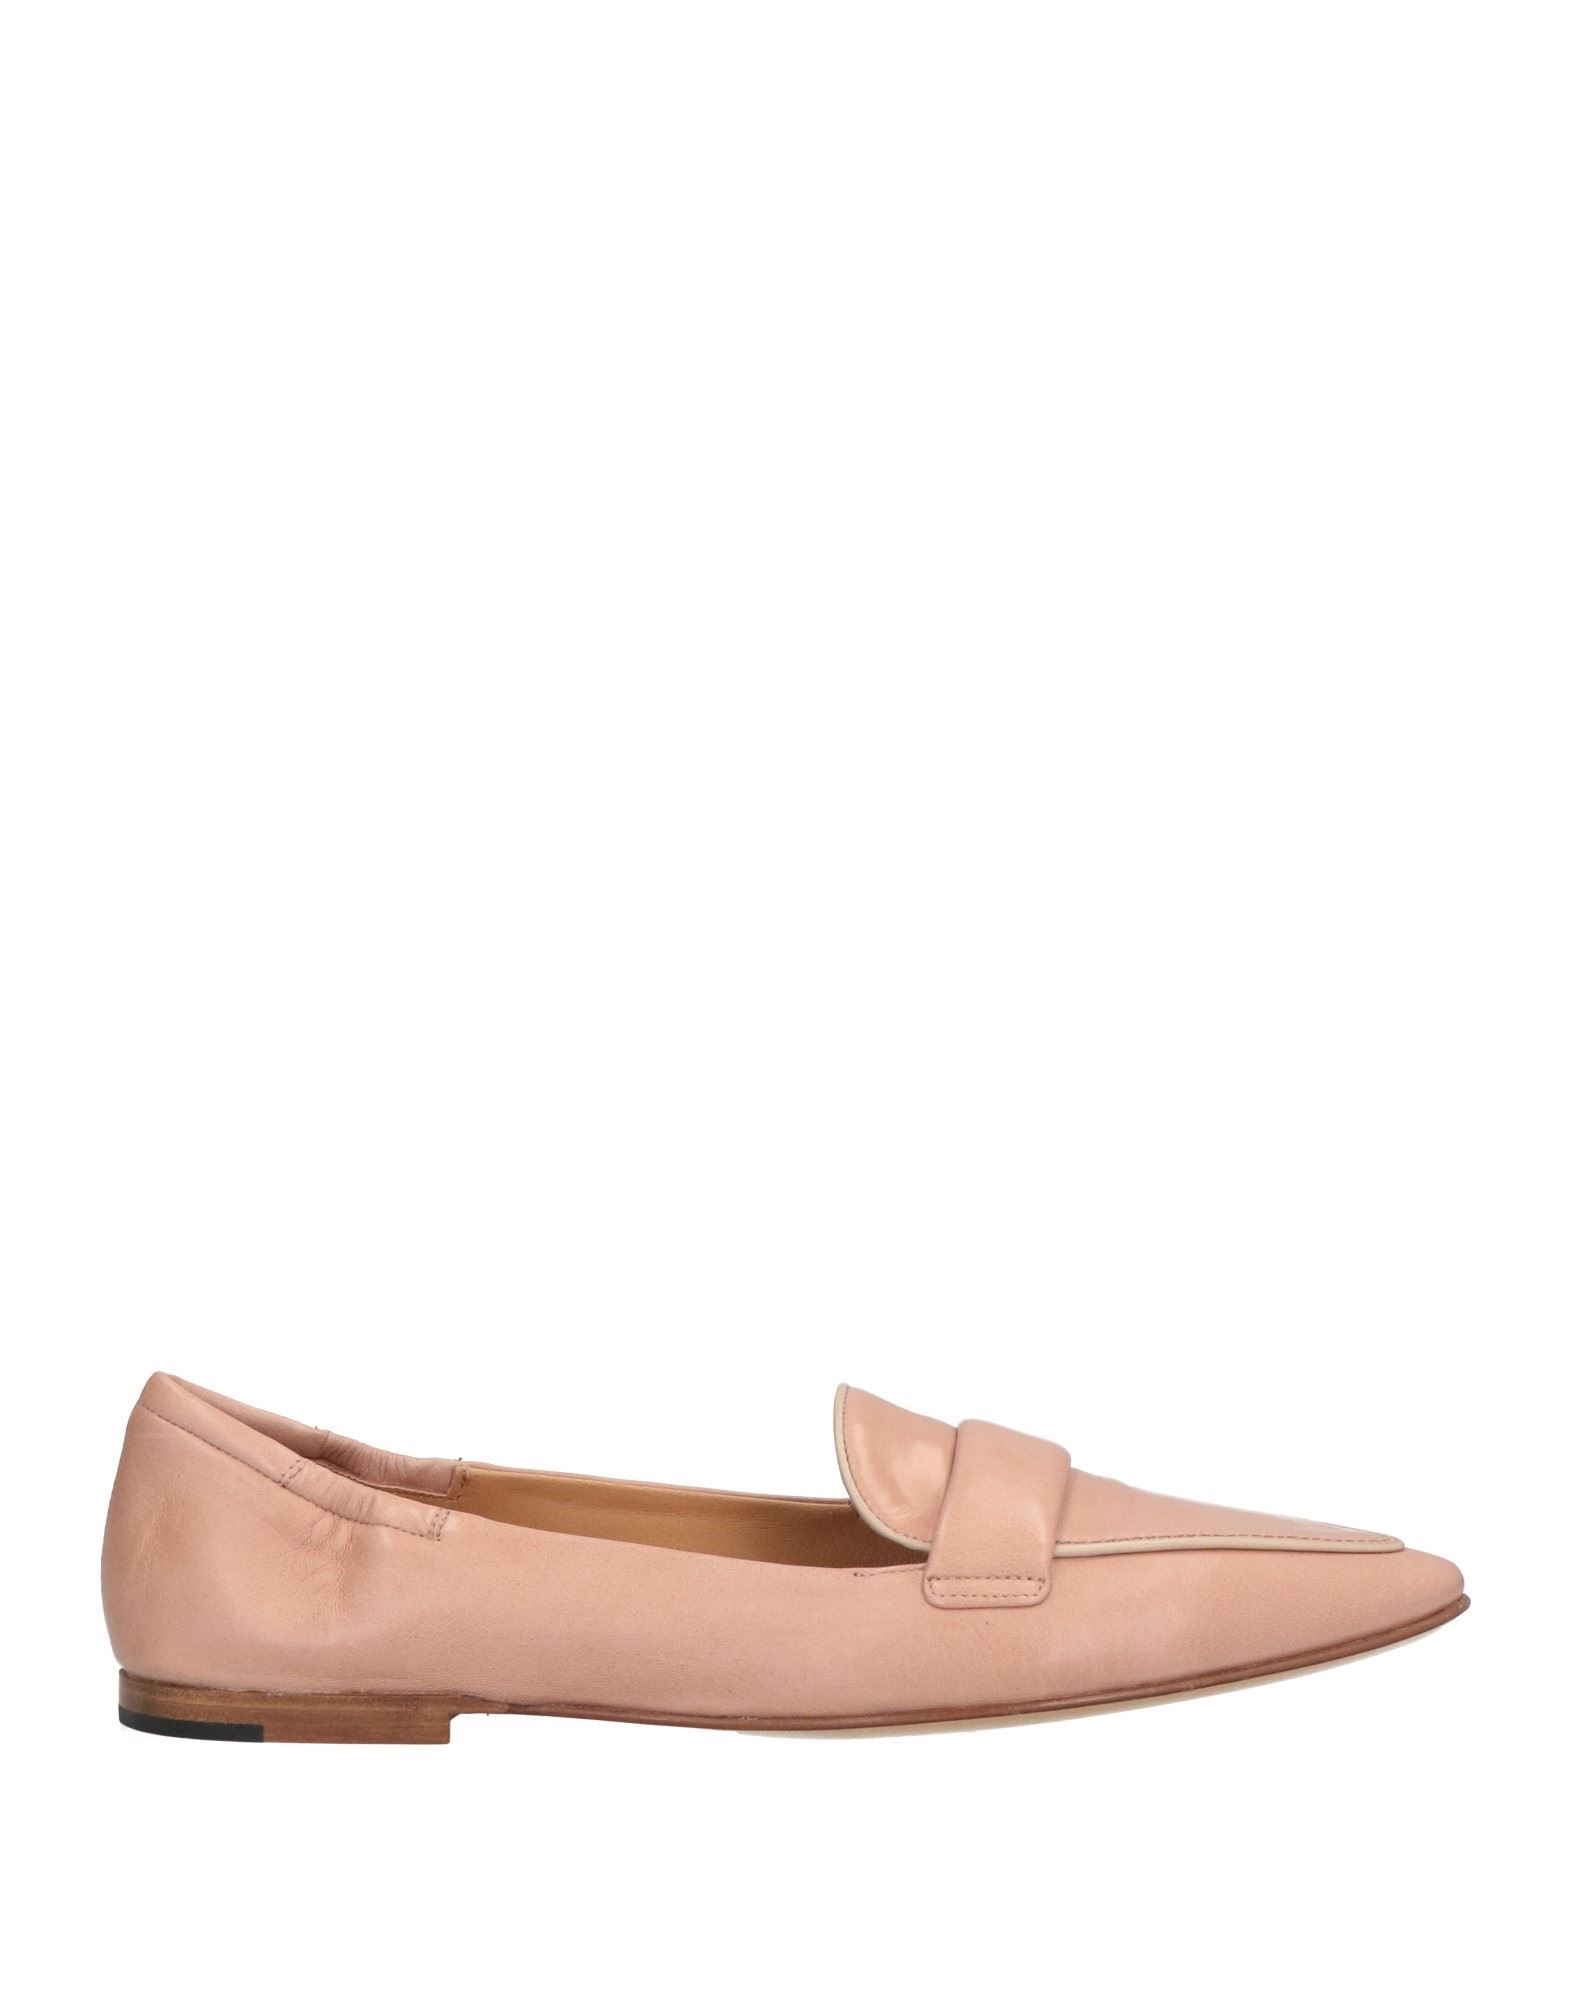 POMME D'OR POMME D'OR WOMAN LOAFERS BLUSH SIZE 10.5 SOFT LEATHER